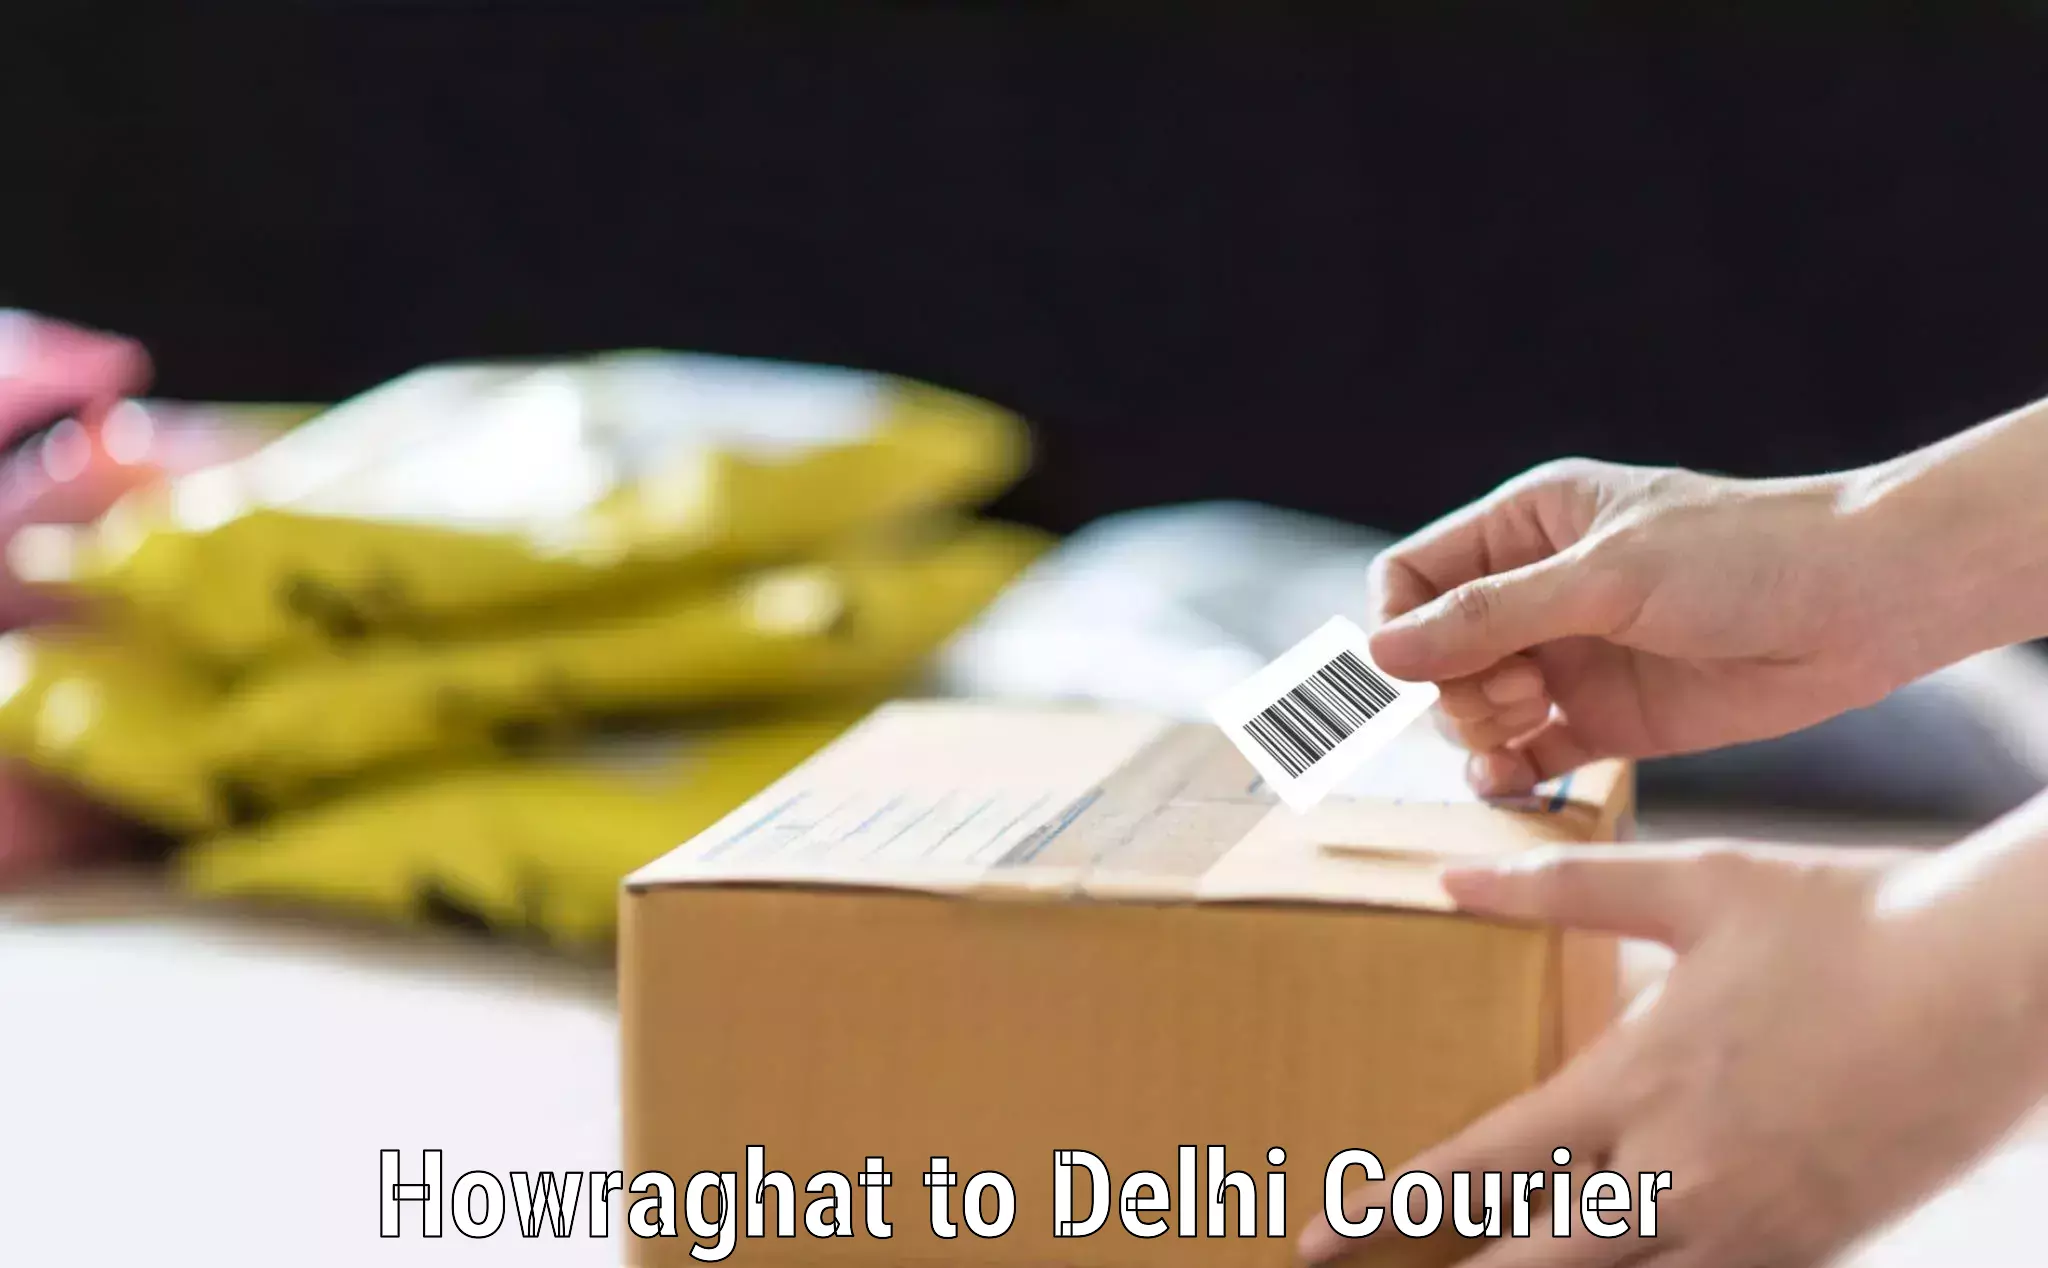 Baggage delivery technology Howraghat to Jawaharlal Nehru University New Delhi